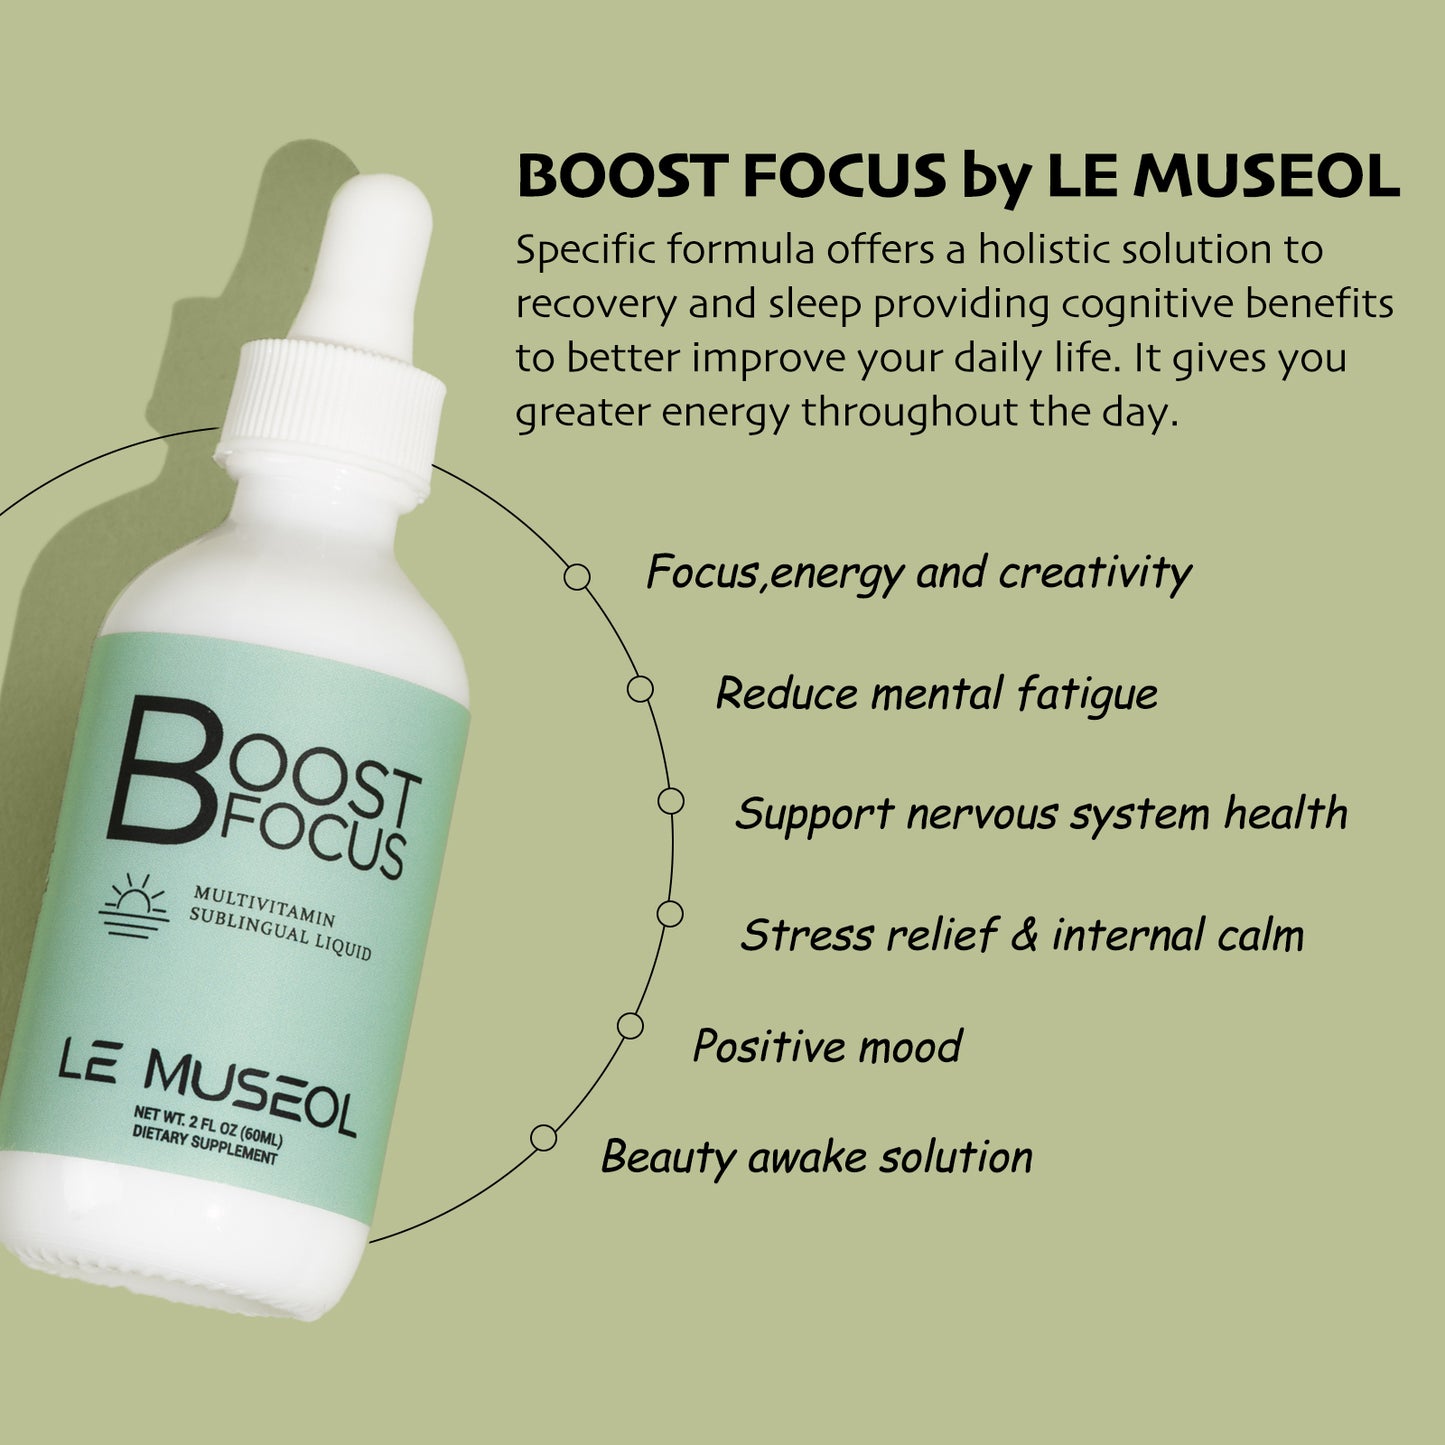 Le Museol Vegan Liquid with optimal energy, strength, focus and health